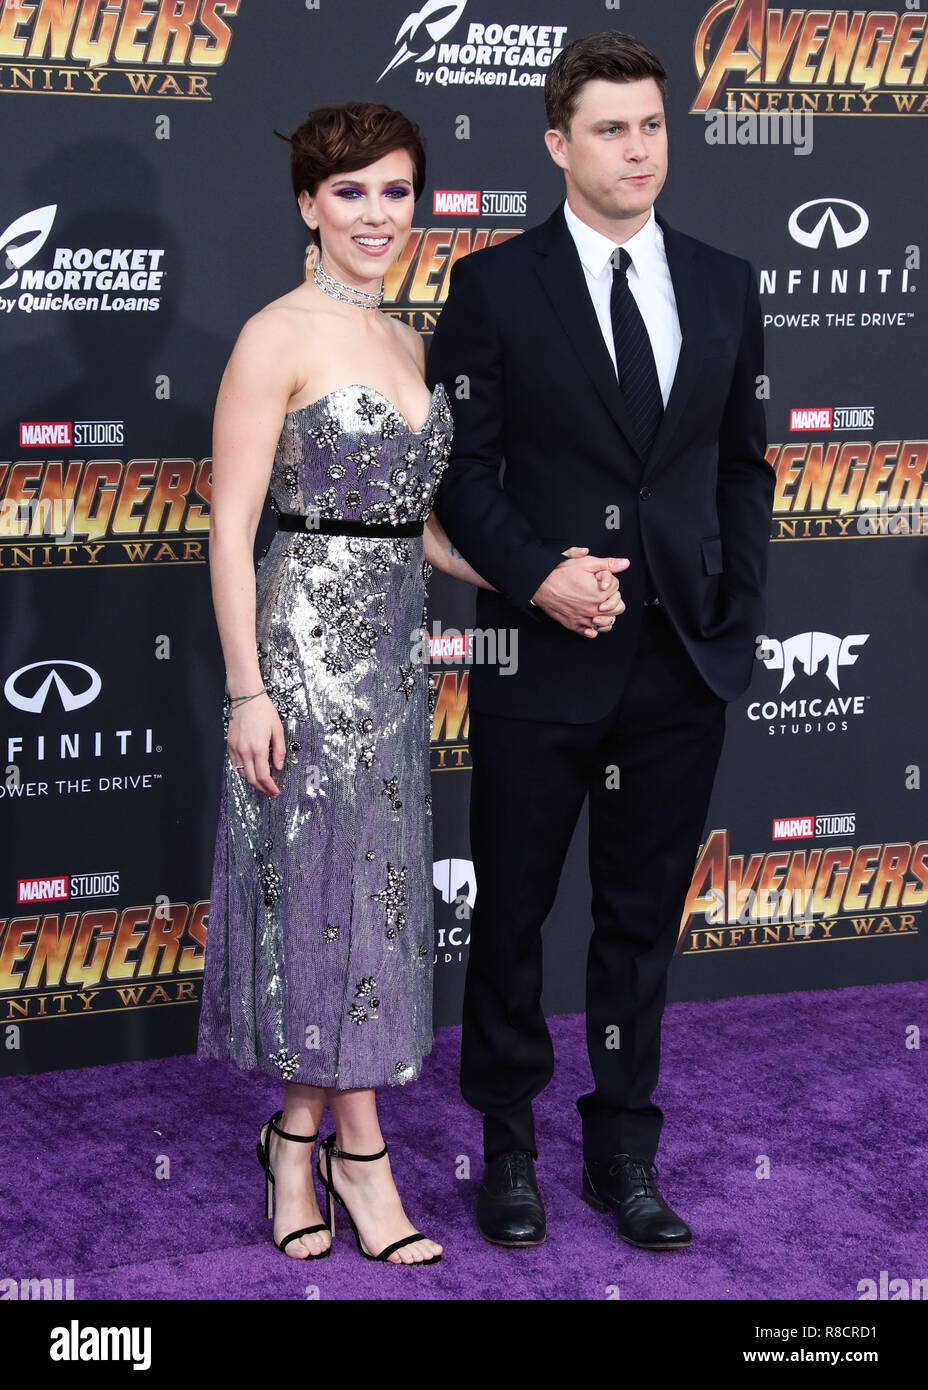 HOLLYWOOD, LOS ANGELES, CA, USA - APRIL 23: Scarlett Johansson, Colin Jost at the World Premiere Of Disney And Marvel's 'Avengers: Infinity War' held at the El Capitan Theatre, Dolby Theatre and TCL Chinese Theatre IMAX on April 23, 2018 in Hollywood, Los Angeles, California, United States. (Photo by Xavier Collin/Image Press Agency) Stock Photo